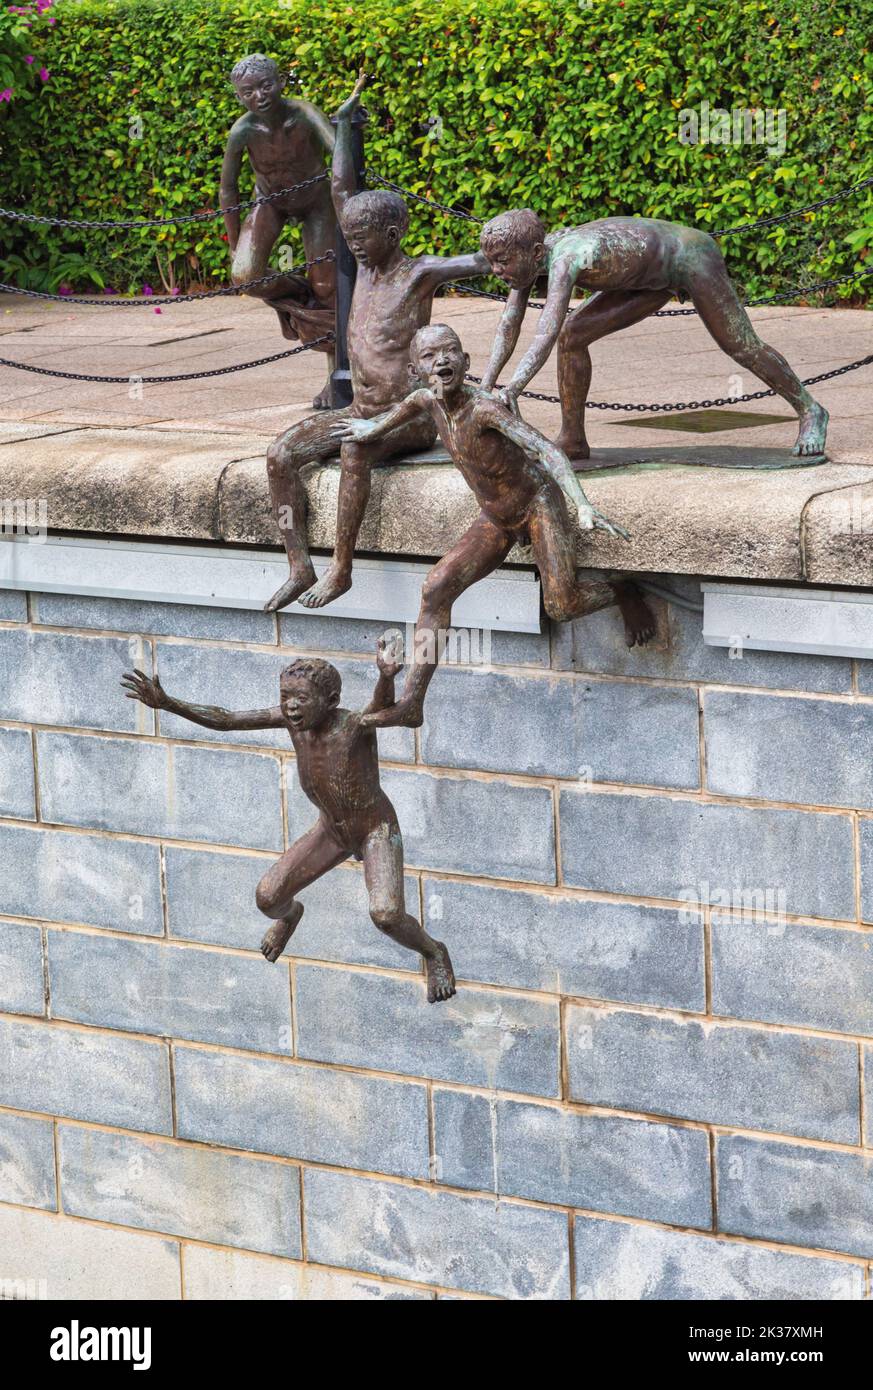 The First Generation, a bronze sculpture by Singaporean artist Chong Fah Cheong, born 1946. Republic of Singapore.  He has created several figurative Stock Photo